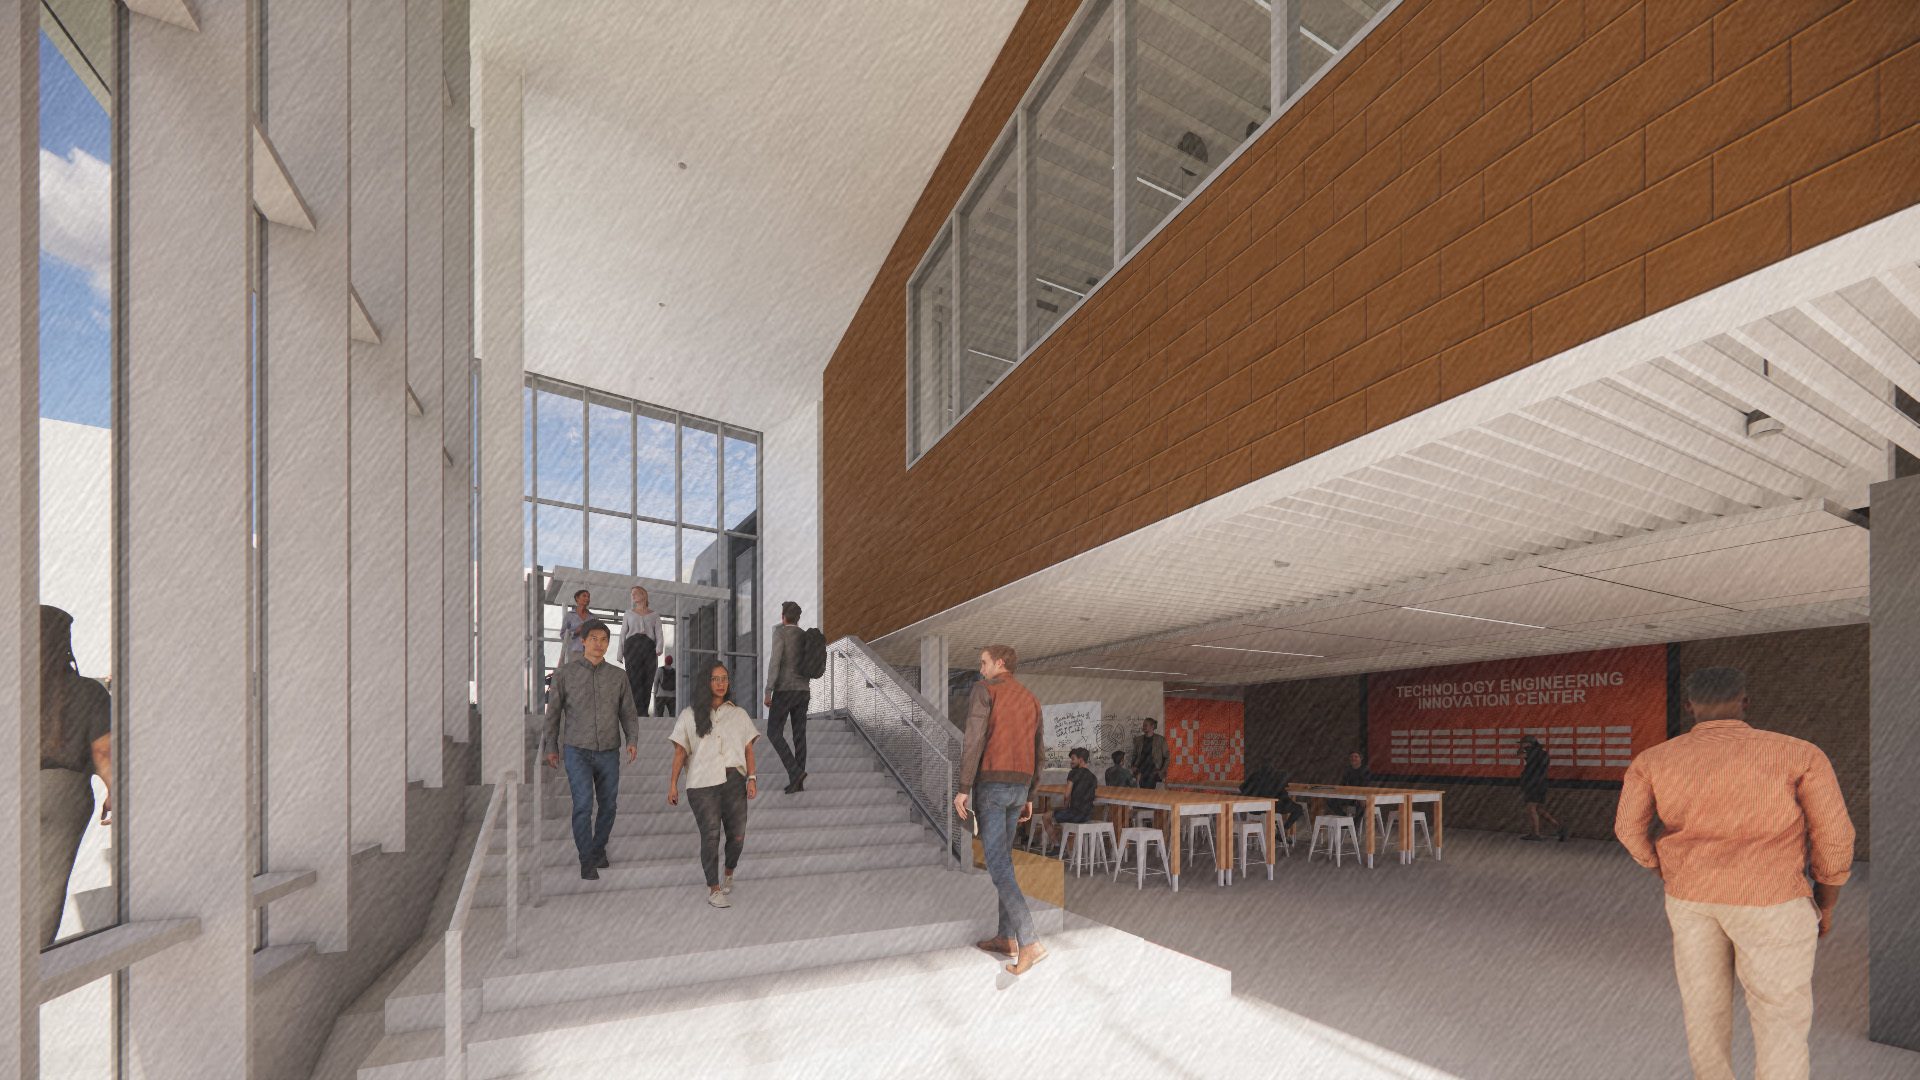 An artist's rendering of a common space in the BGSU Technology Engineering Innovation Center.